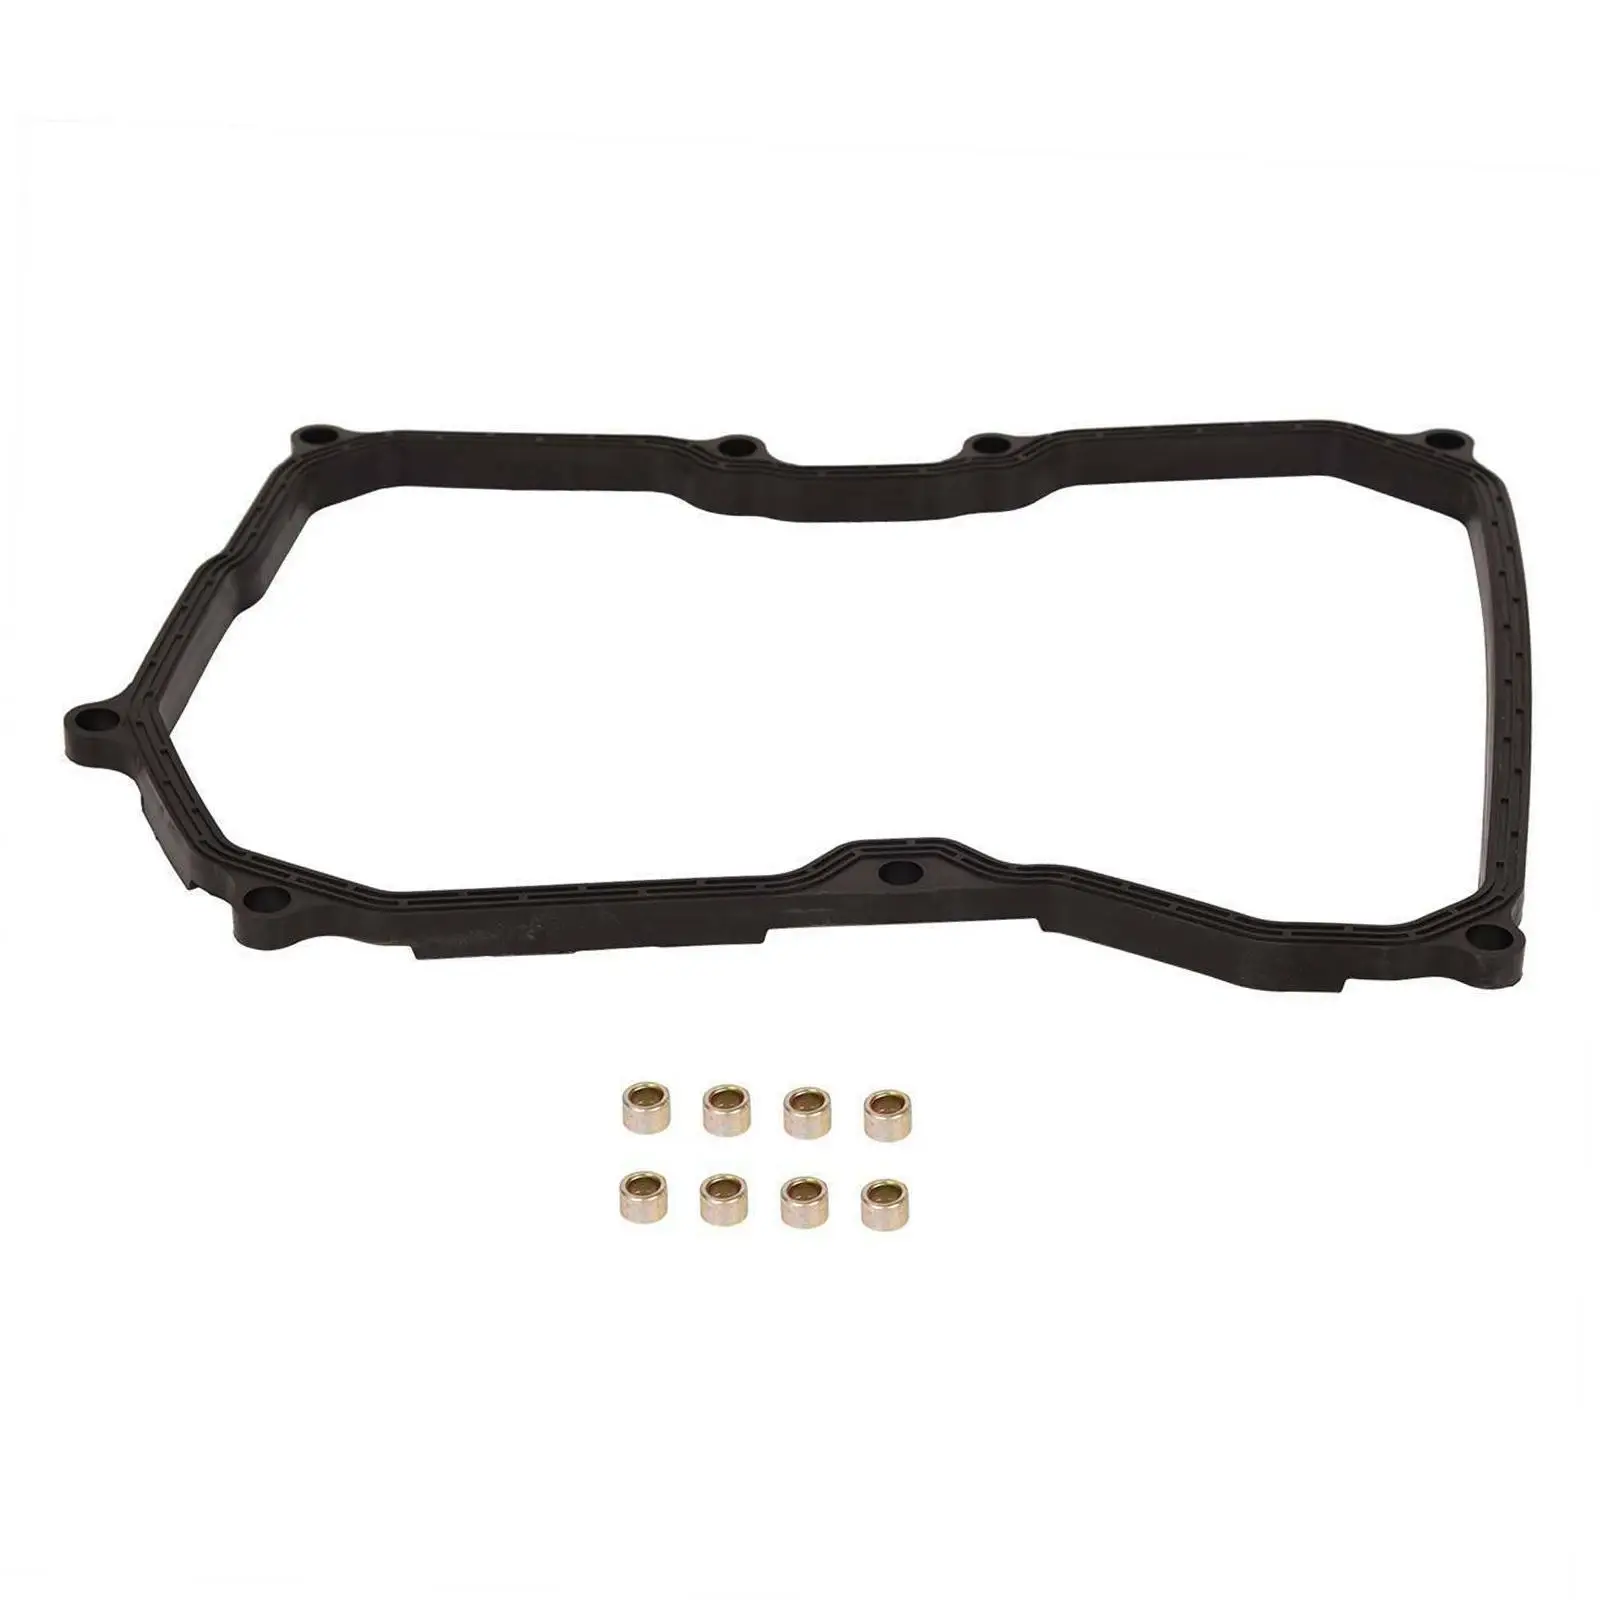 Transmission Pan Gasket 24117566356 Fit for Mini 2007+ Spare Parts Replace